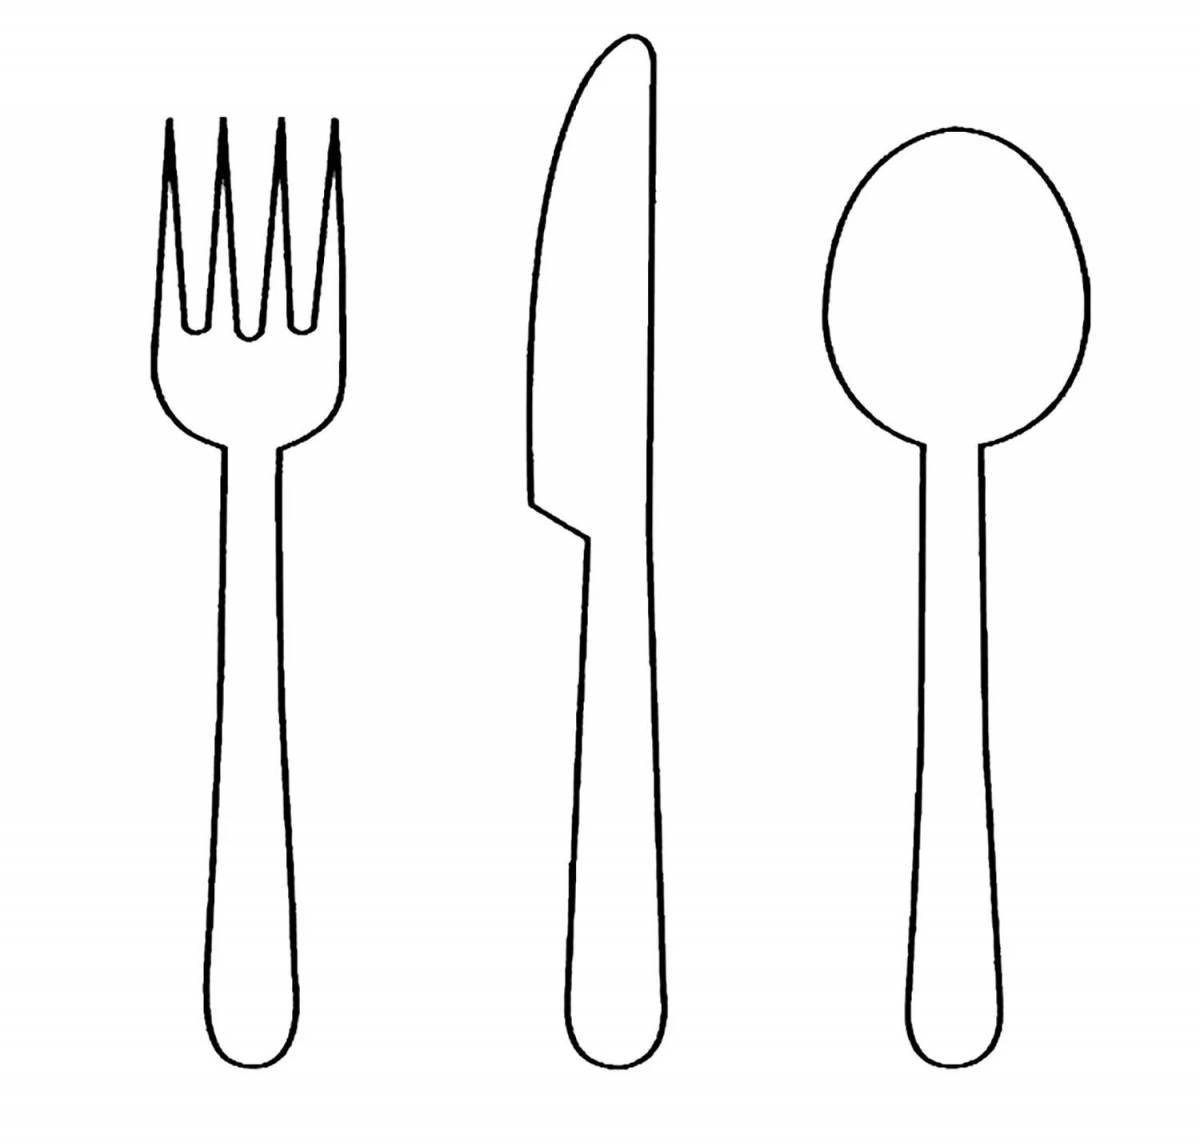 Delightful fork coloring page